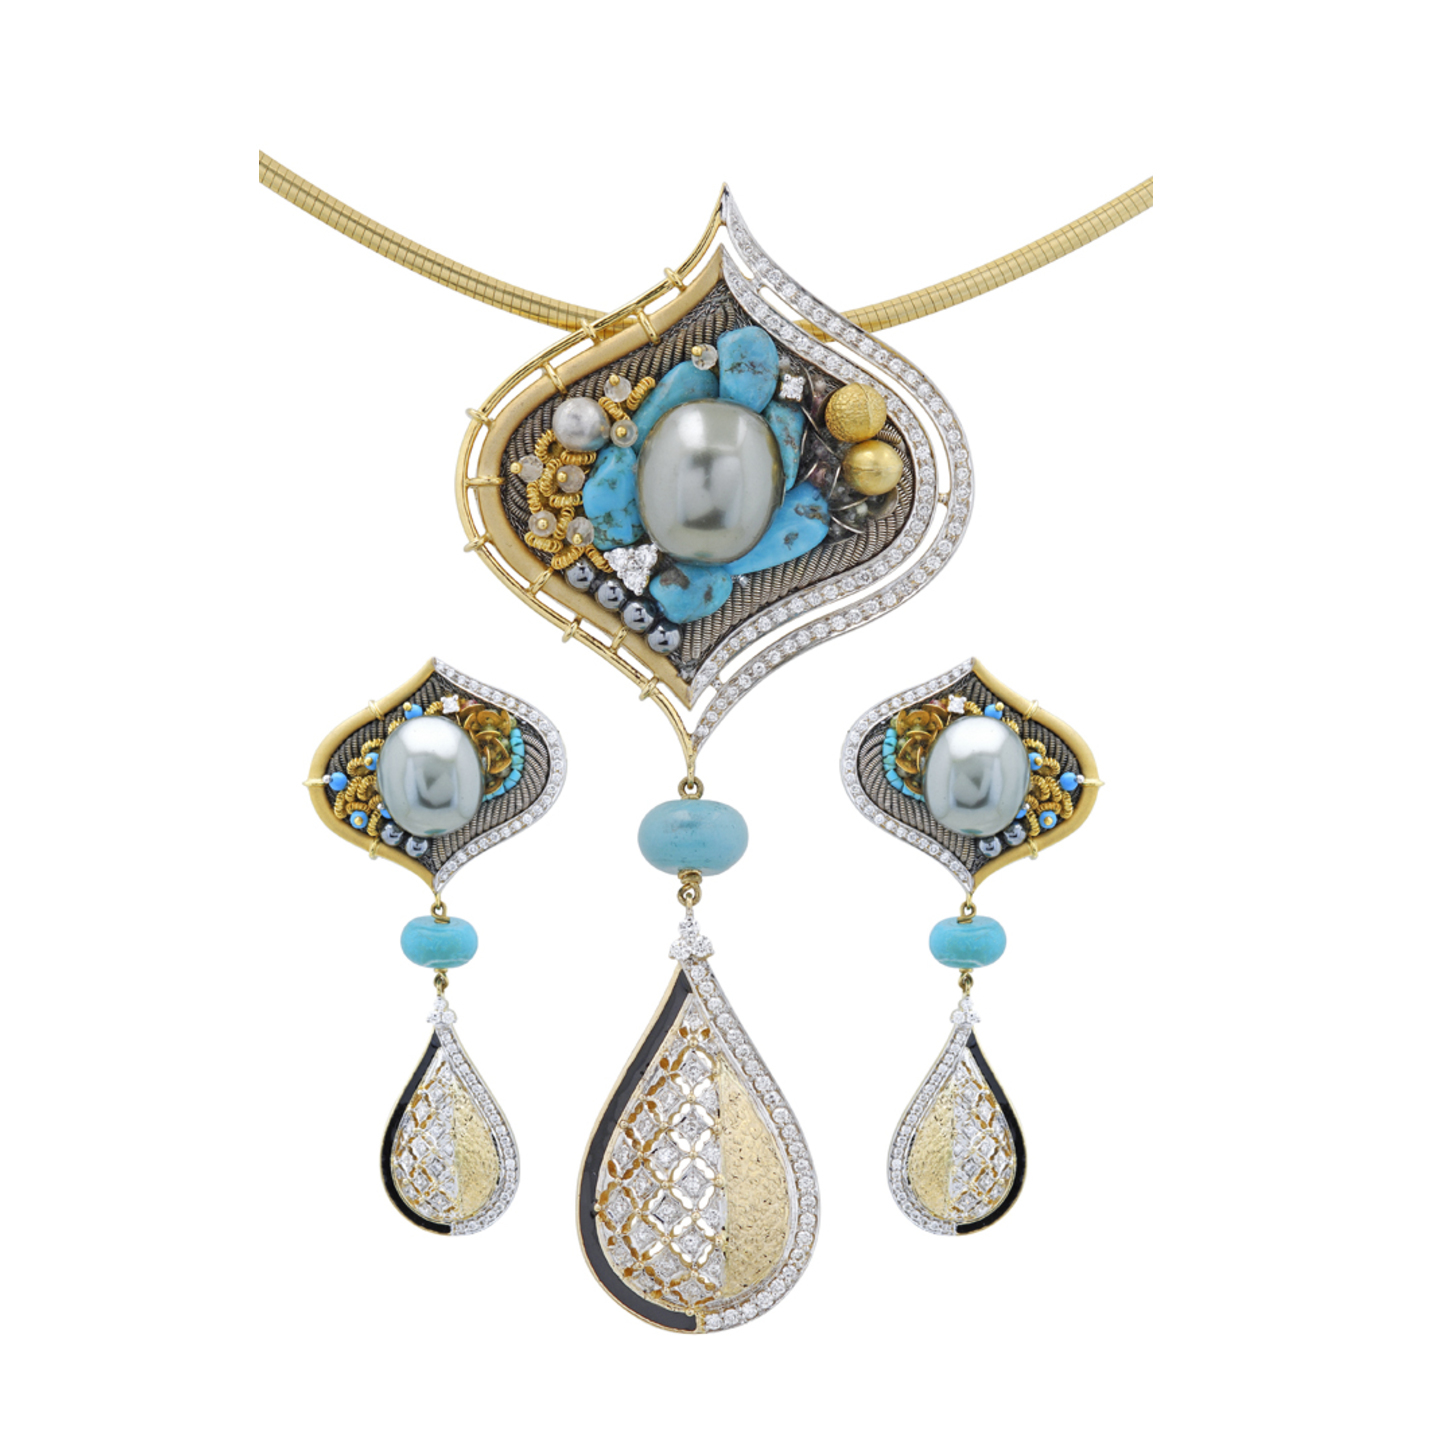 Ornate pendant sets, where clusters of gemstones artistically juxtaposed with gold wires, using the art of embroidery and jewel making.